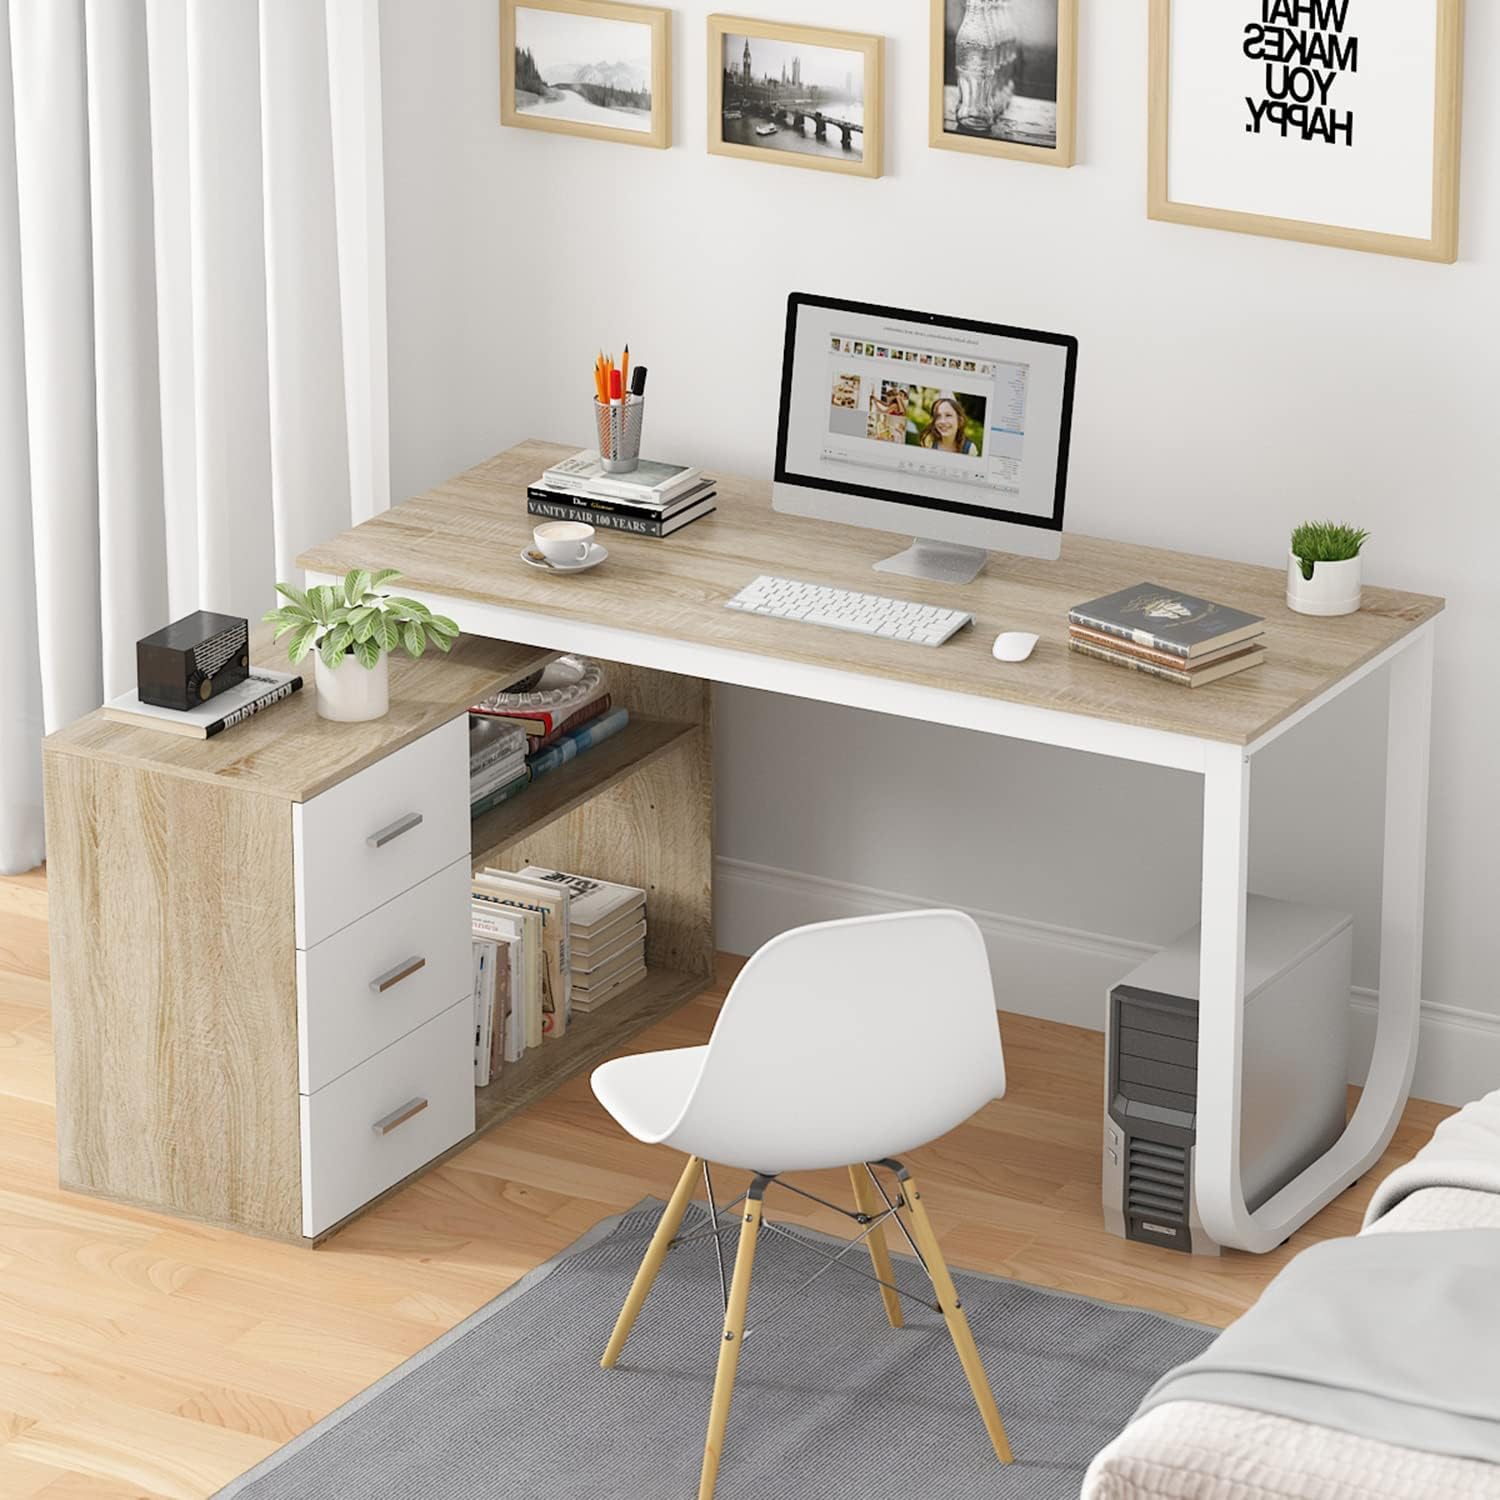 small l shaped desk for home office multipurpose spaces light wood finish and white framing three drawer design with built in bookshelf furniture for full time WFH setup